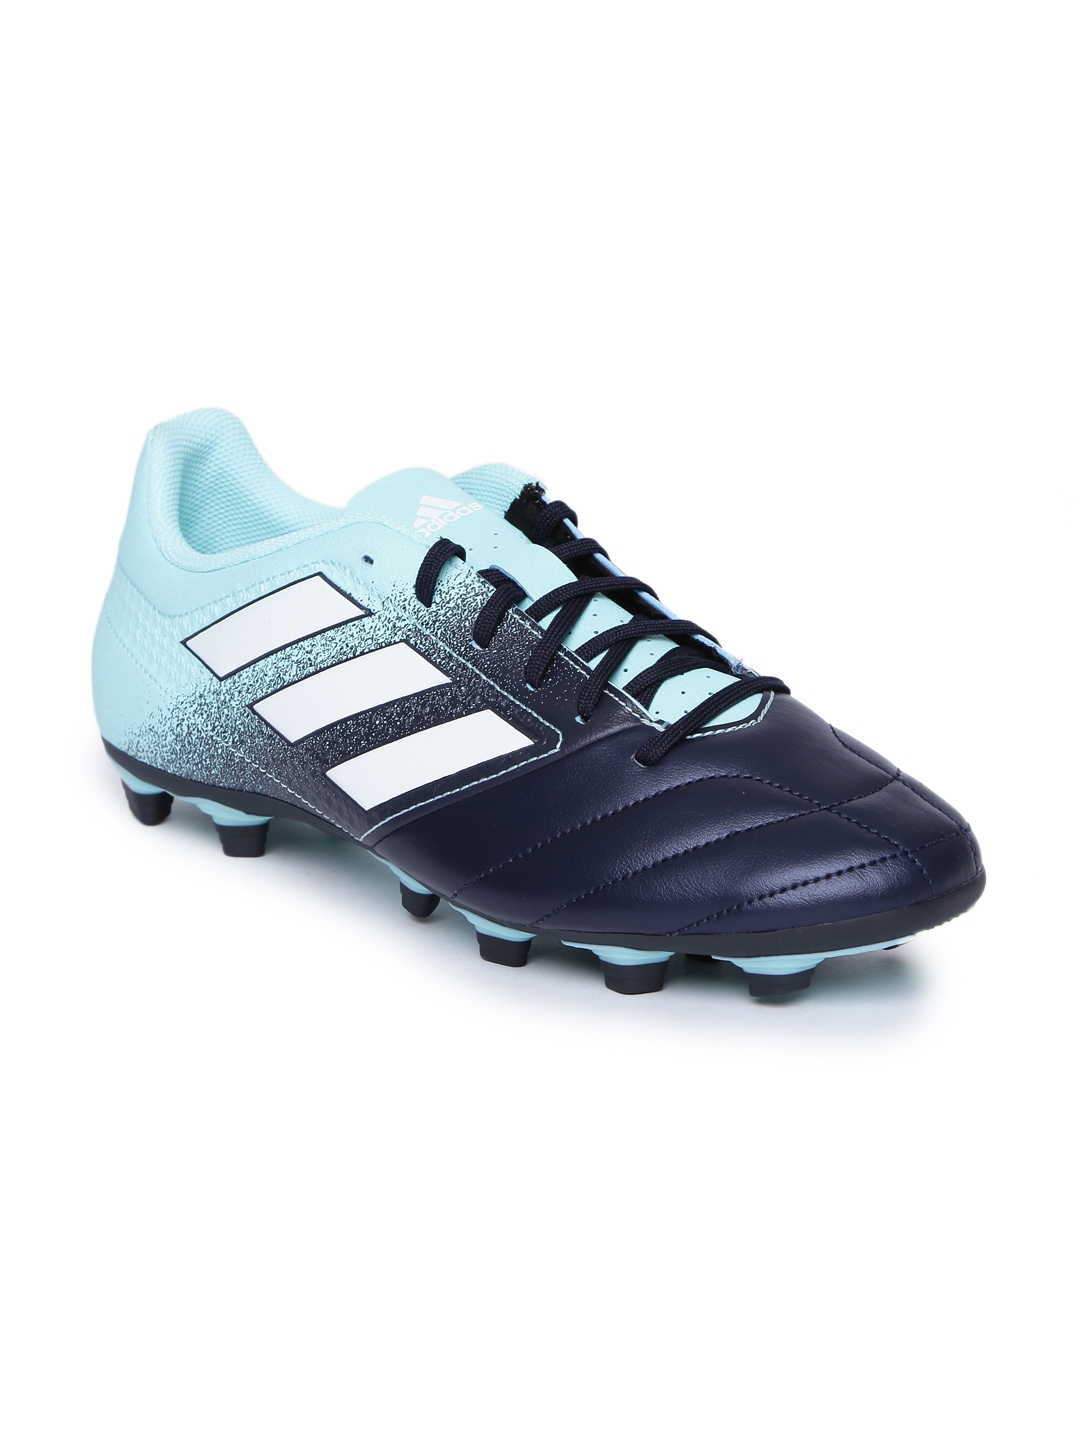 Buy Adidas Men Blue Ace 17 4 Fxg Football Shoes Sports Shoes For